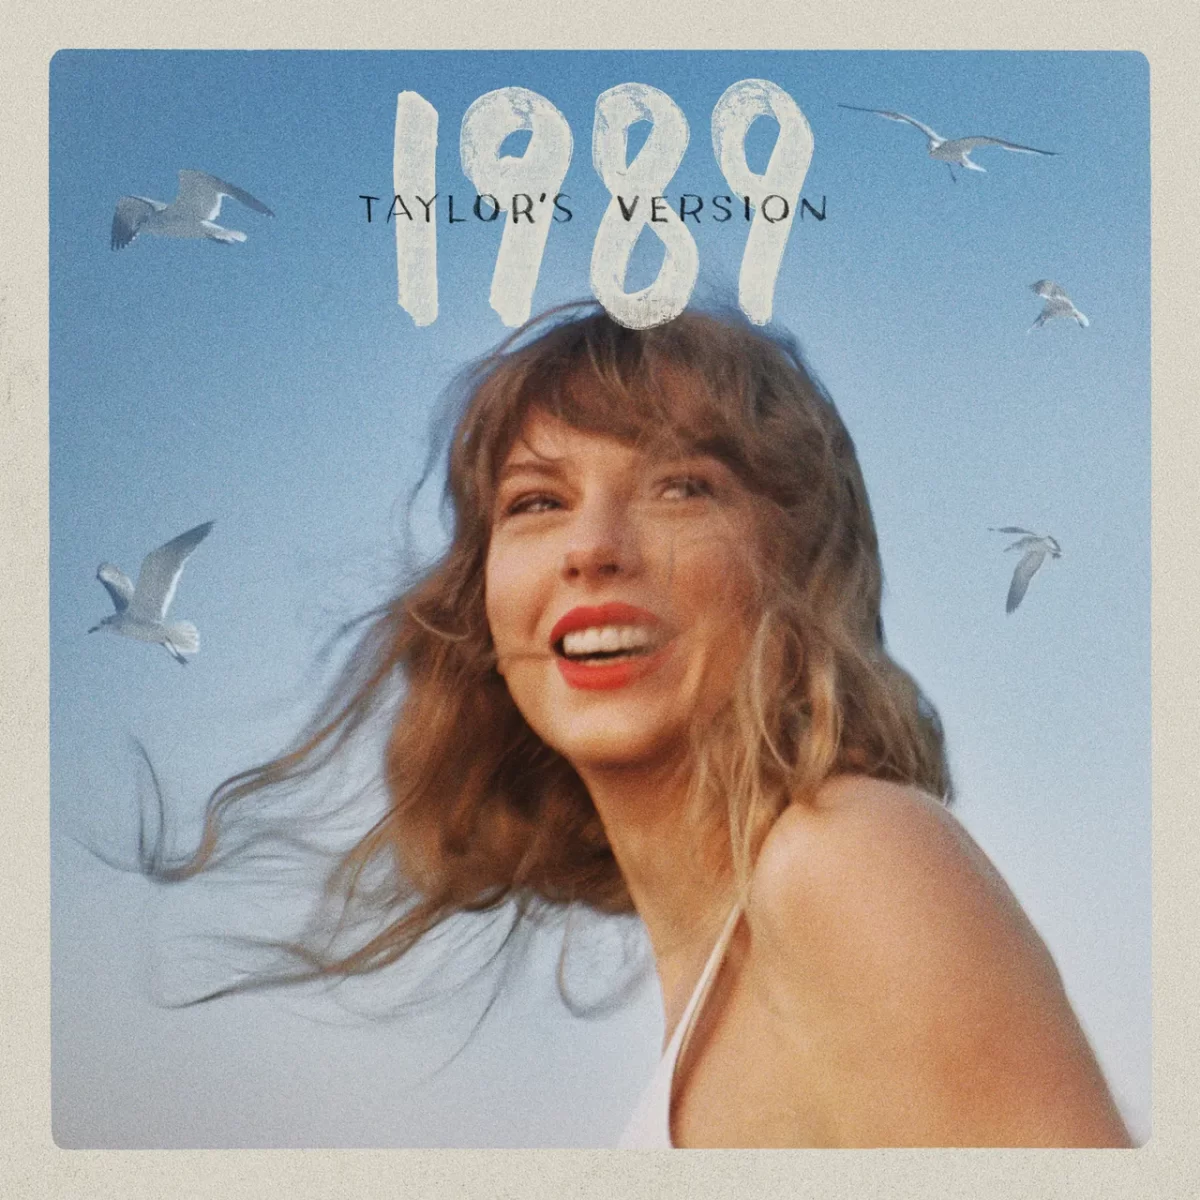 1989 (Taylors Version): A disappointing remake